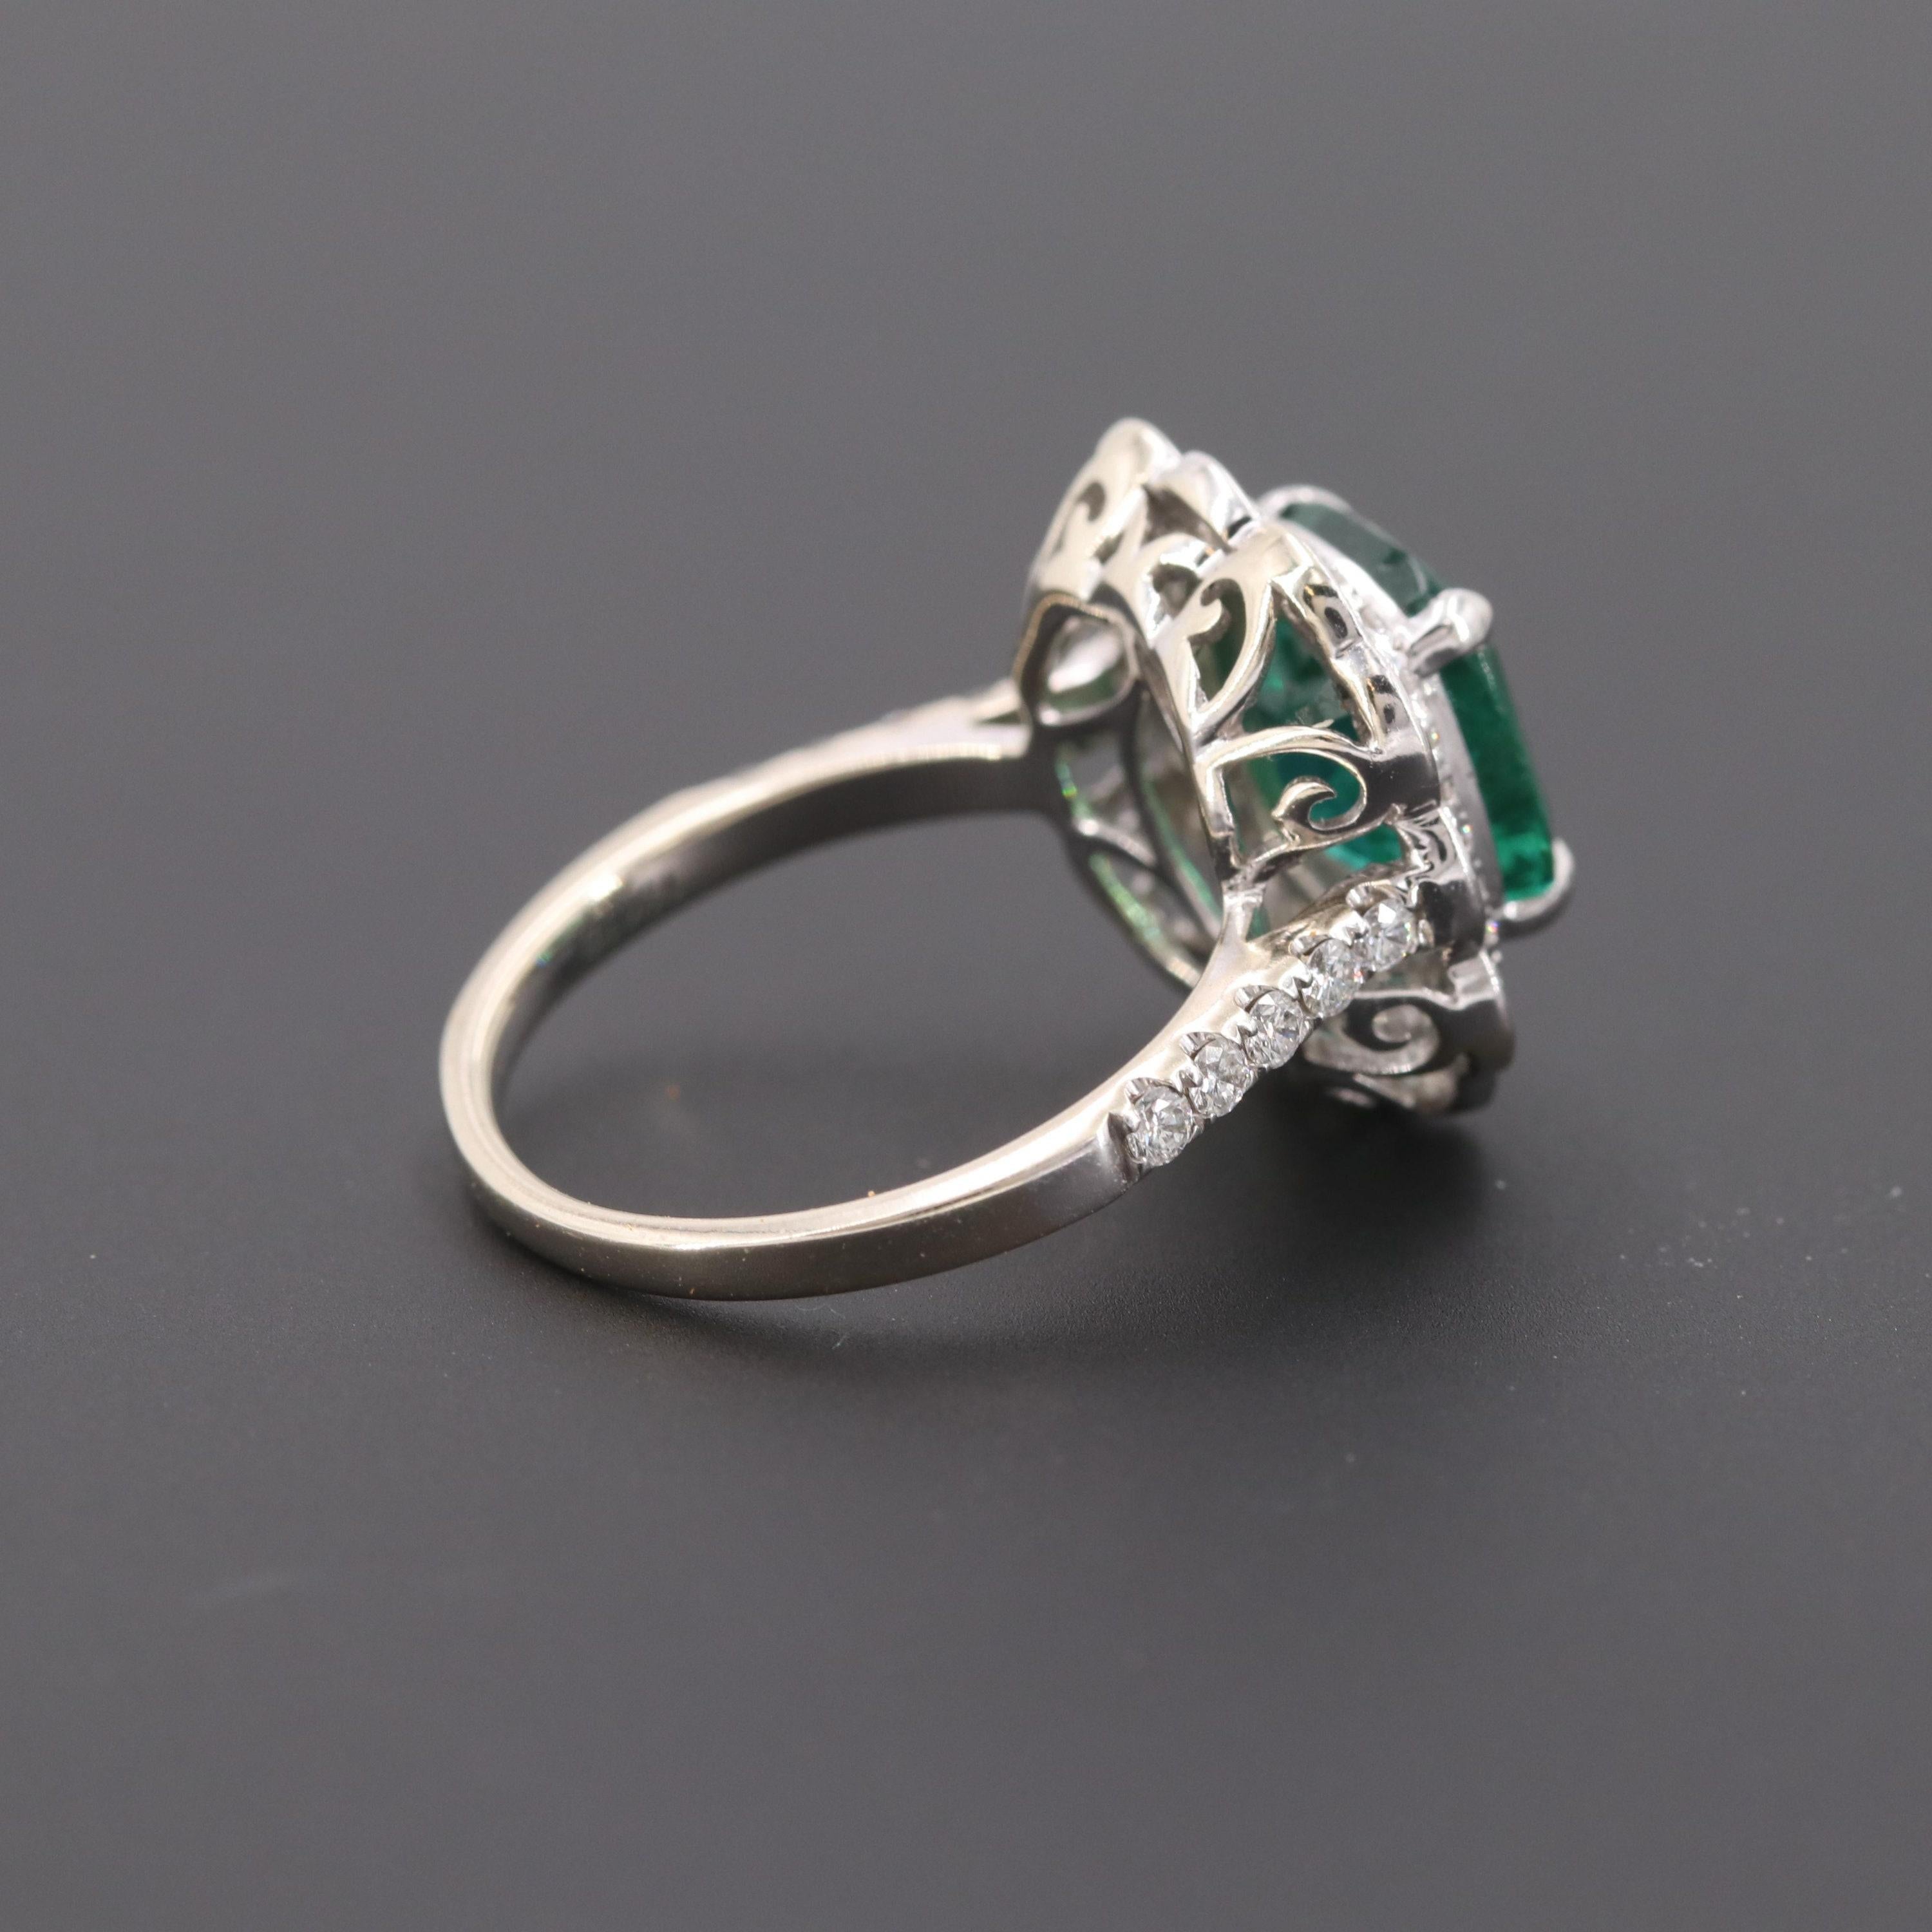 For Sale:  Art Deco 2 CT Natural Cushion Cut Emerald Engagement Ring, Diamond Cocktail Ring 3